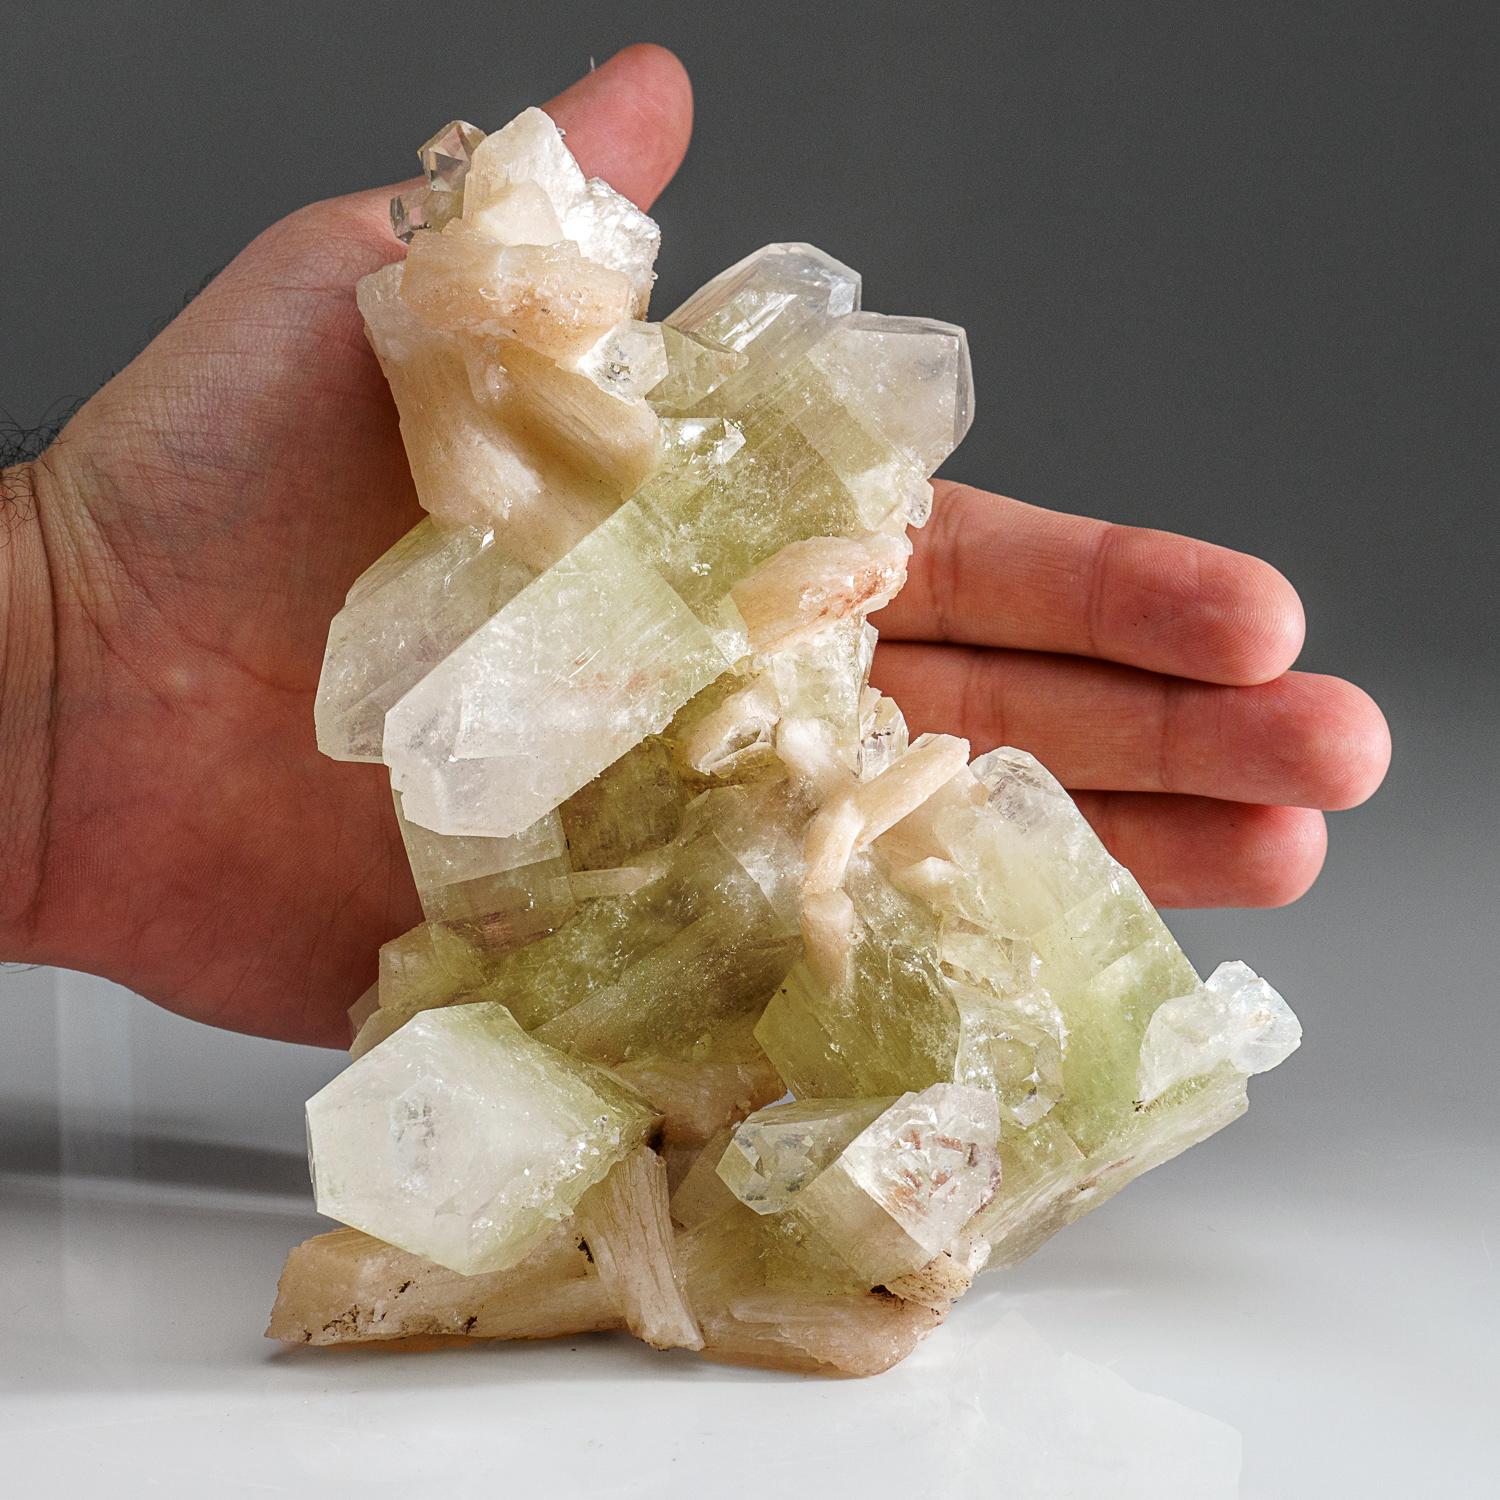 From Jalgaon, Aurangabad District, Maharastra, India

Very aesthetic, Lustrous transparent bi-colored apophyllite crystals with translucent pink stilbite crystals. The apophyllite crystals have green middle zones and colorless pyramidal